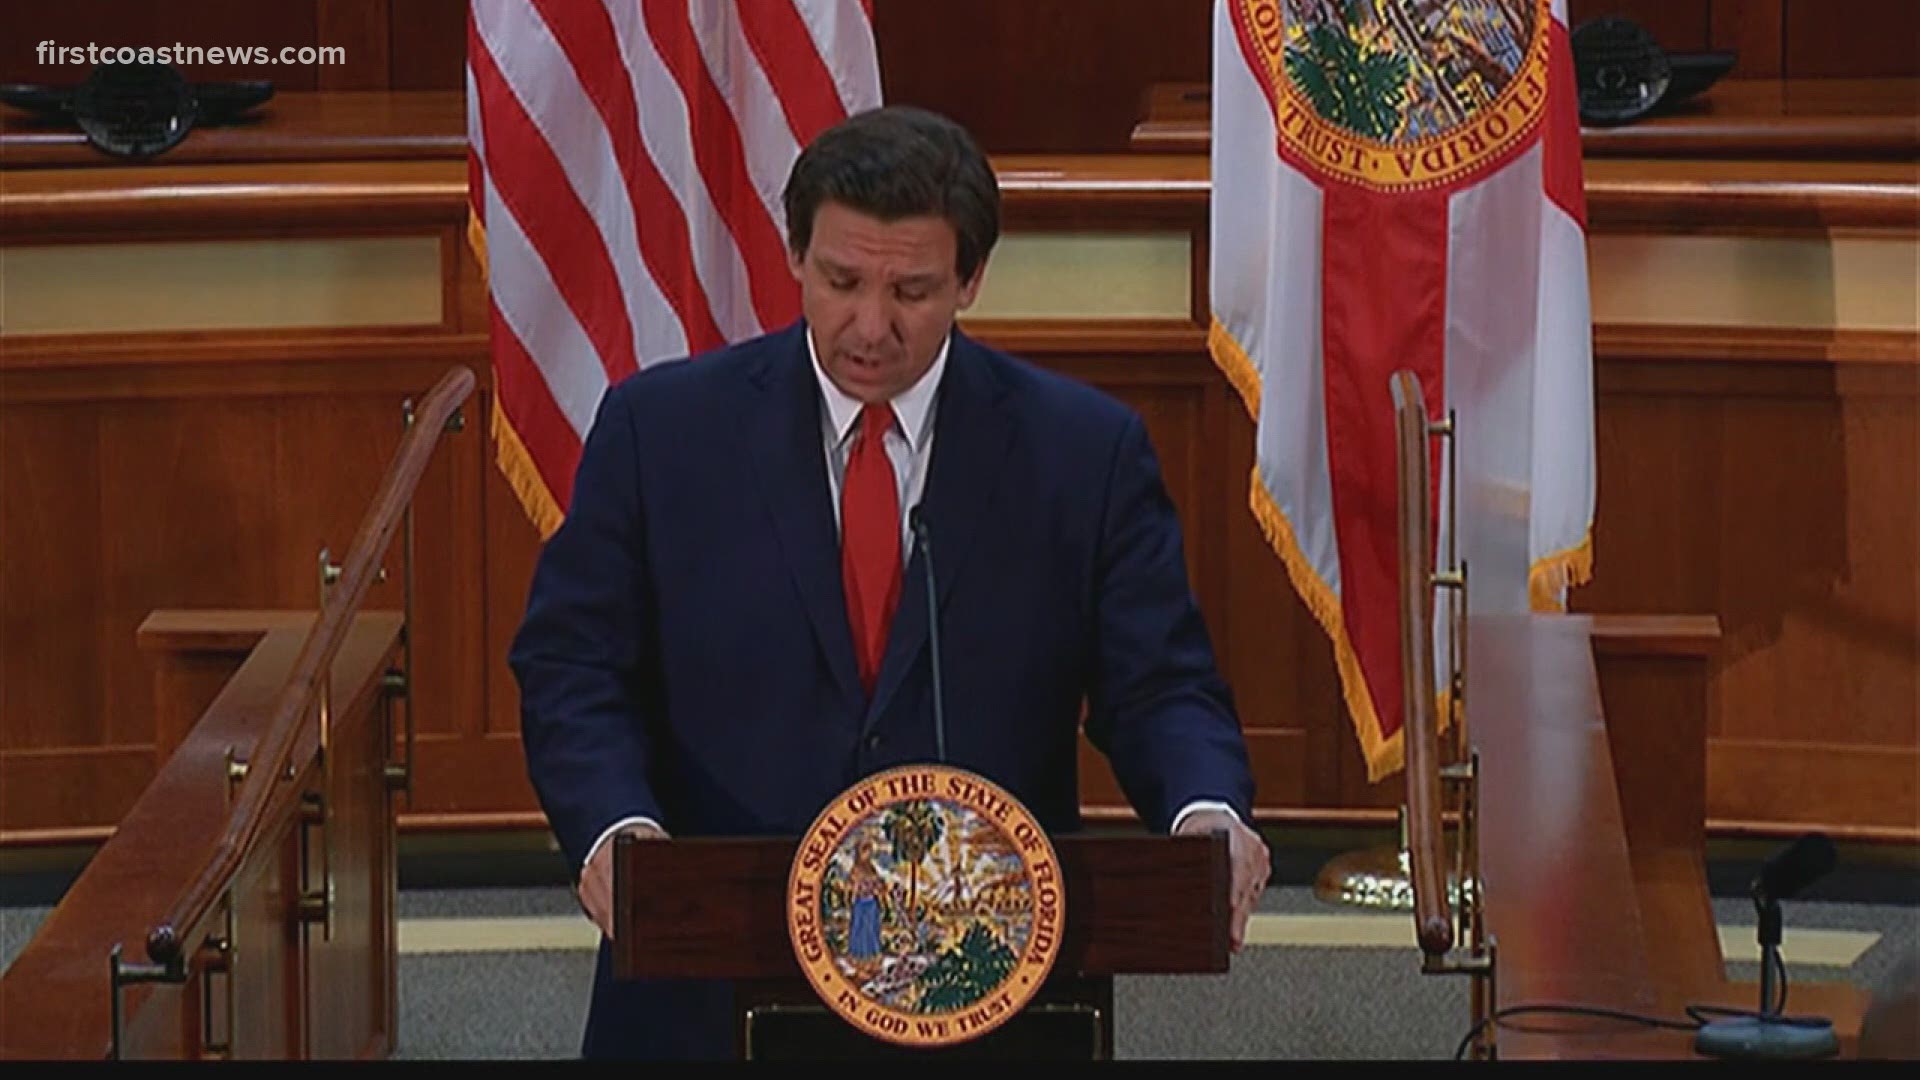 Gov. Ron DeSantis want to propose a fine on 'big tech' companies for restricting speech of political candidates in Florida.